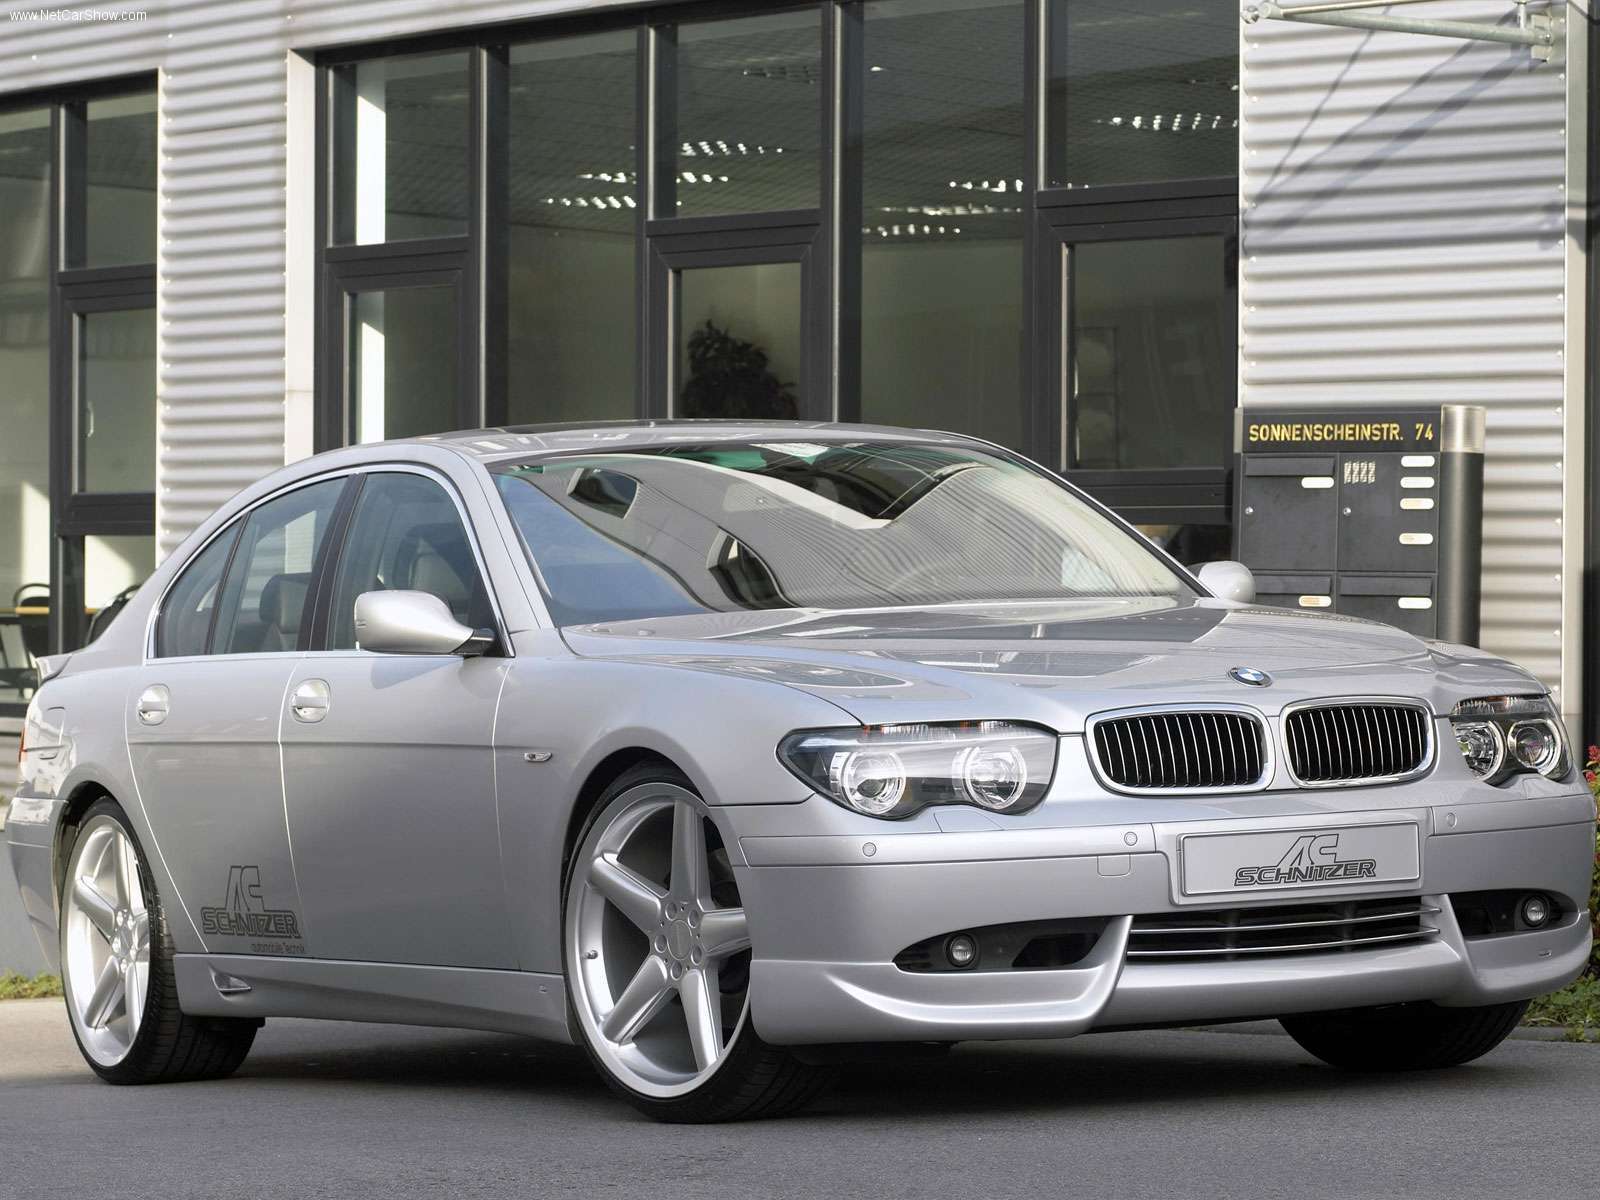 Bmw 730d e65 tuning #2